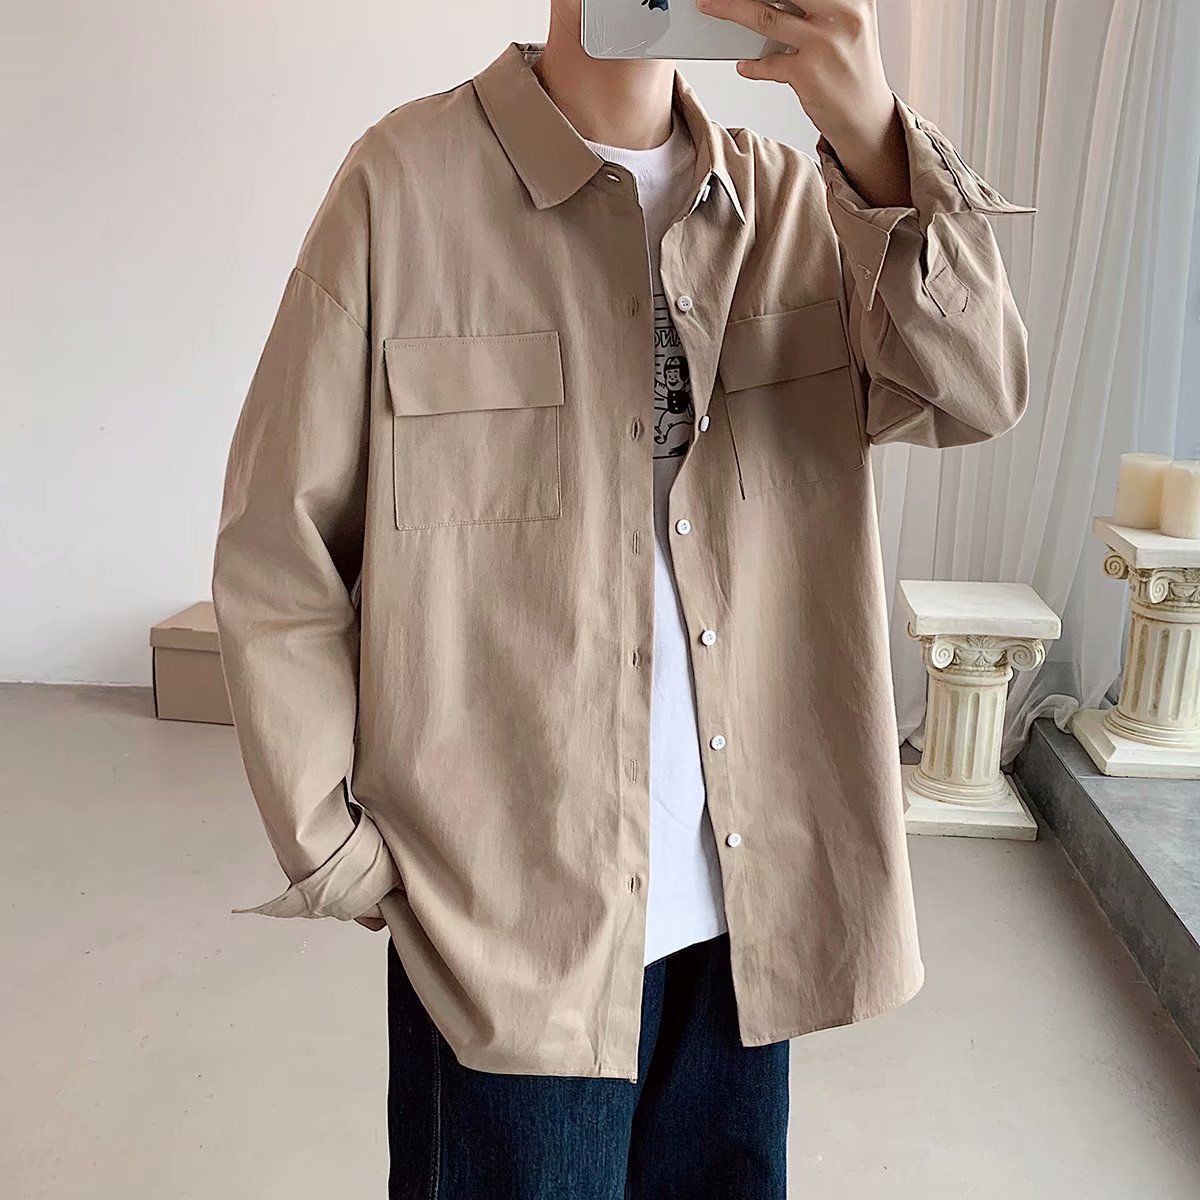 Spring and autumn shirt men's long-sleeved student Korean style trendy handsome tooling shirt Hong Kong style ruffian handsome casual all-match coat